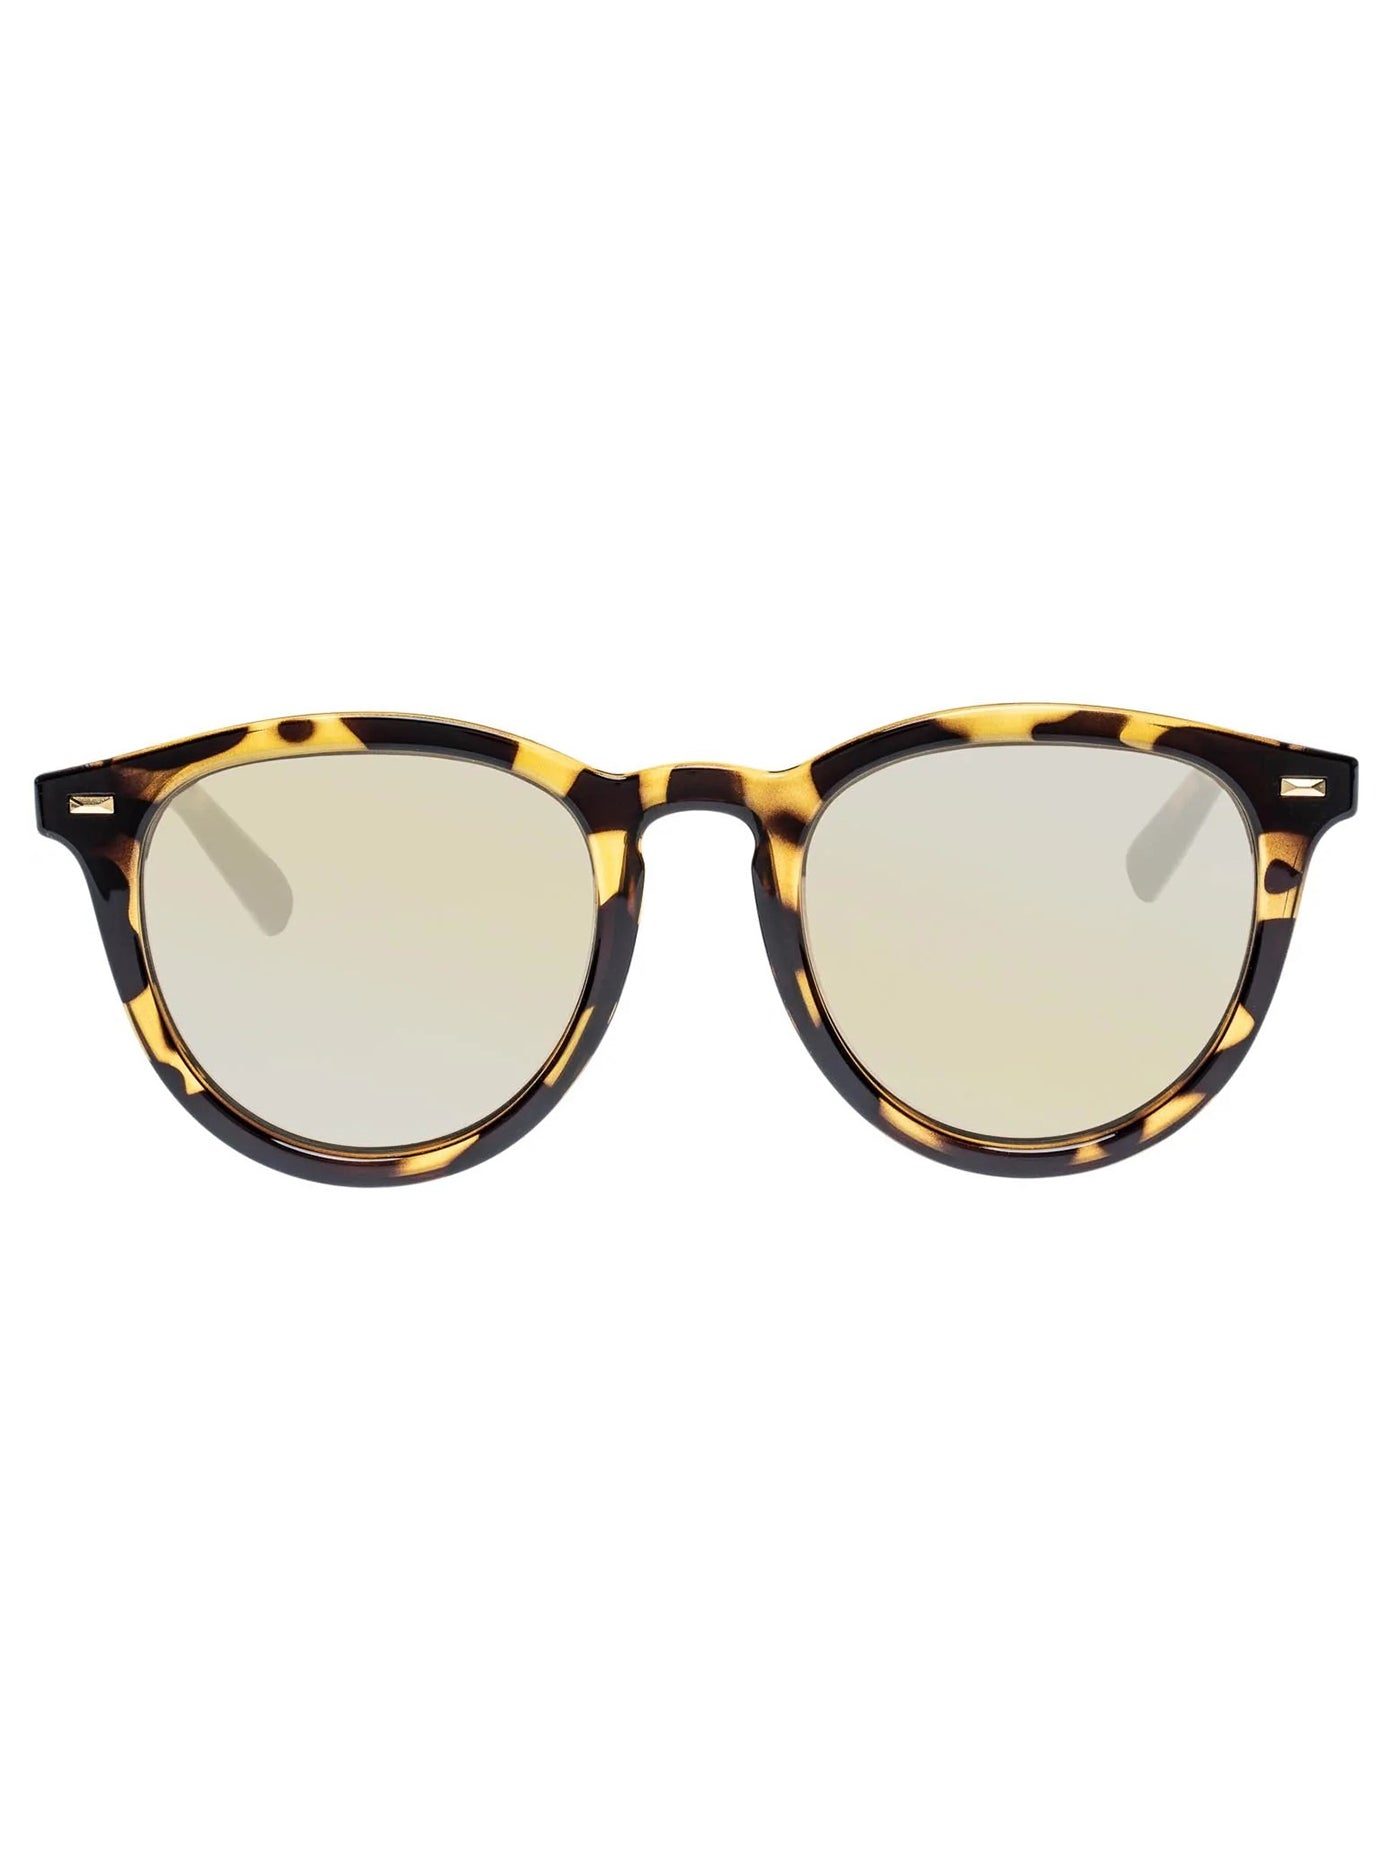 Le Specs Fire Starter Syrup Tort/Gold Mirror Sunglasses